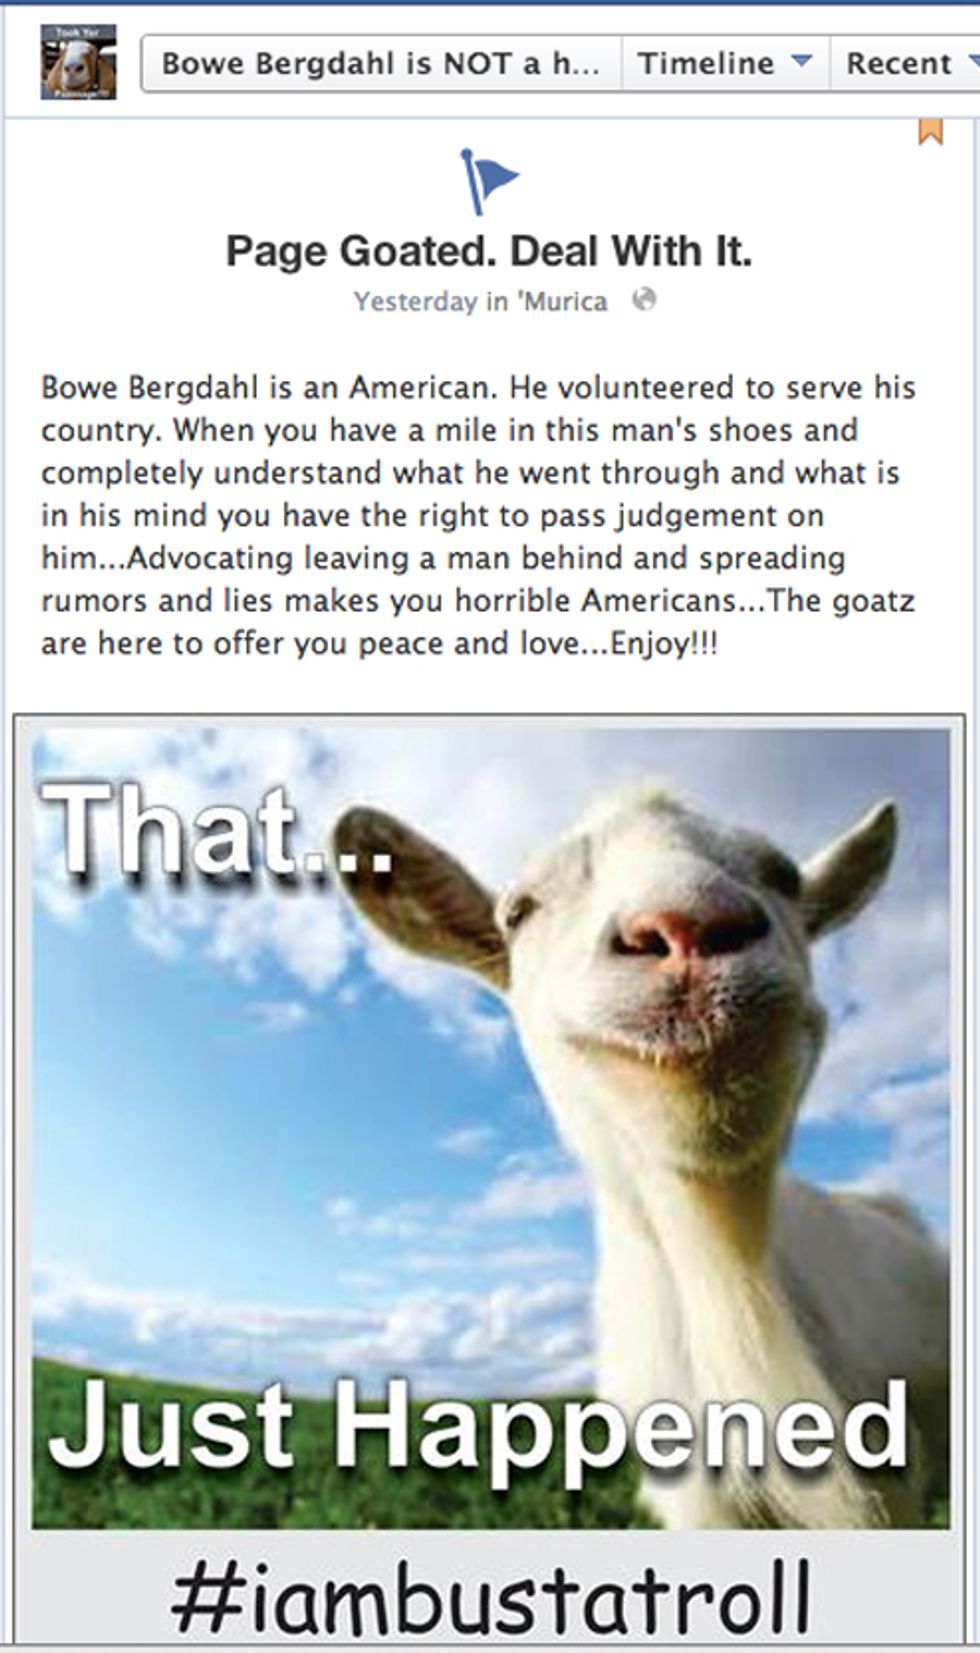 Stupid Rightwing Anti-Bowe Bergdahl Facebook Page Is Now All Full Of Goats